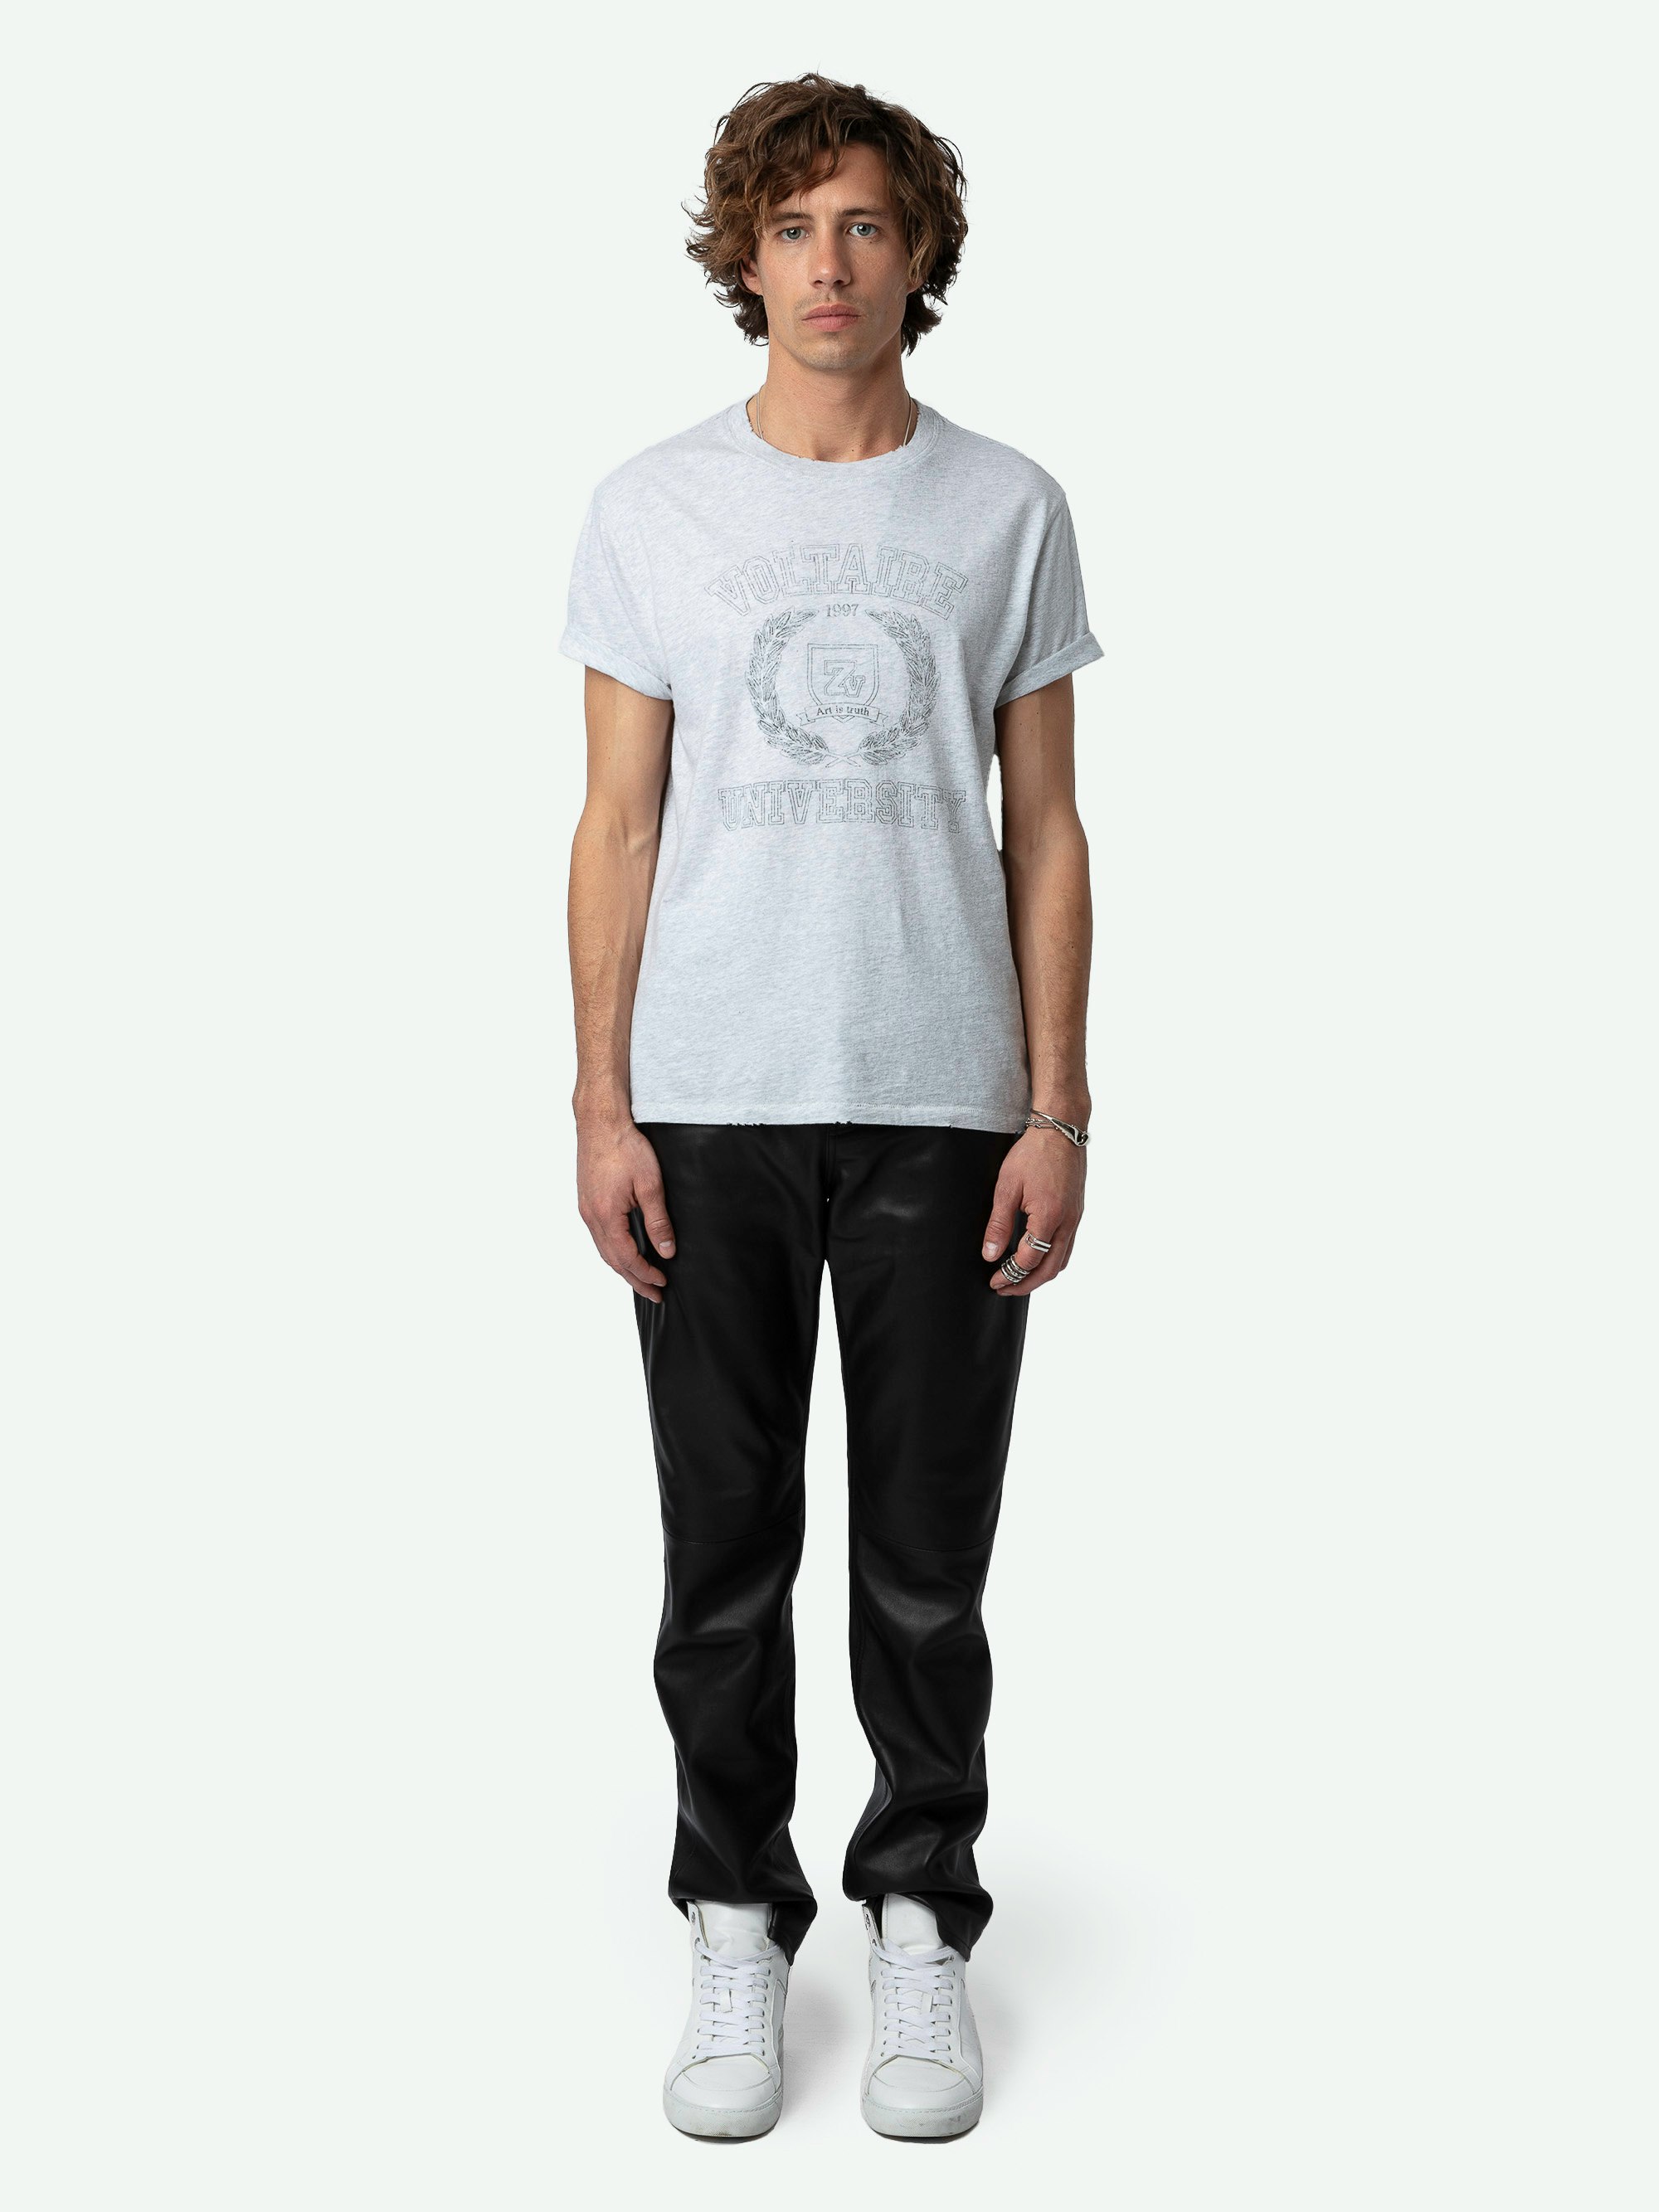 Jimmy Insignia T-shirt - Short-sleeved organic cotton T-shirt with insignia print on the front.